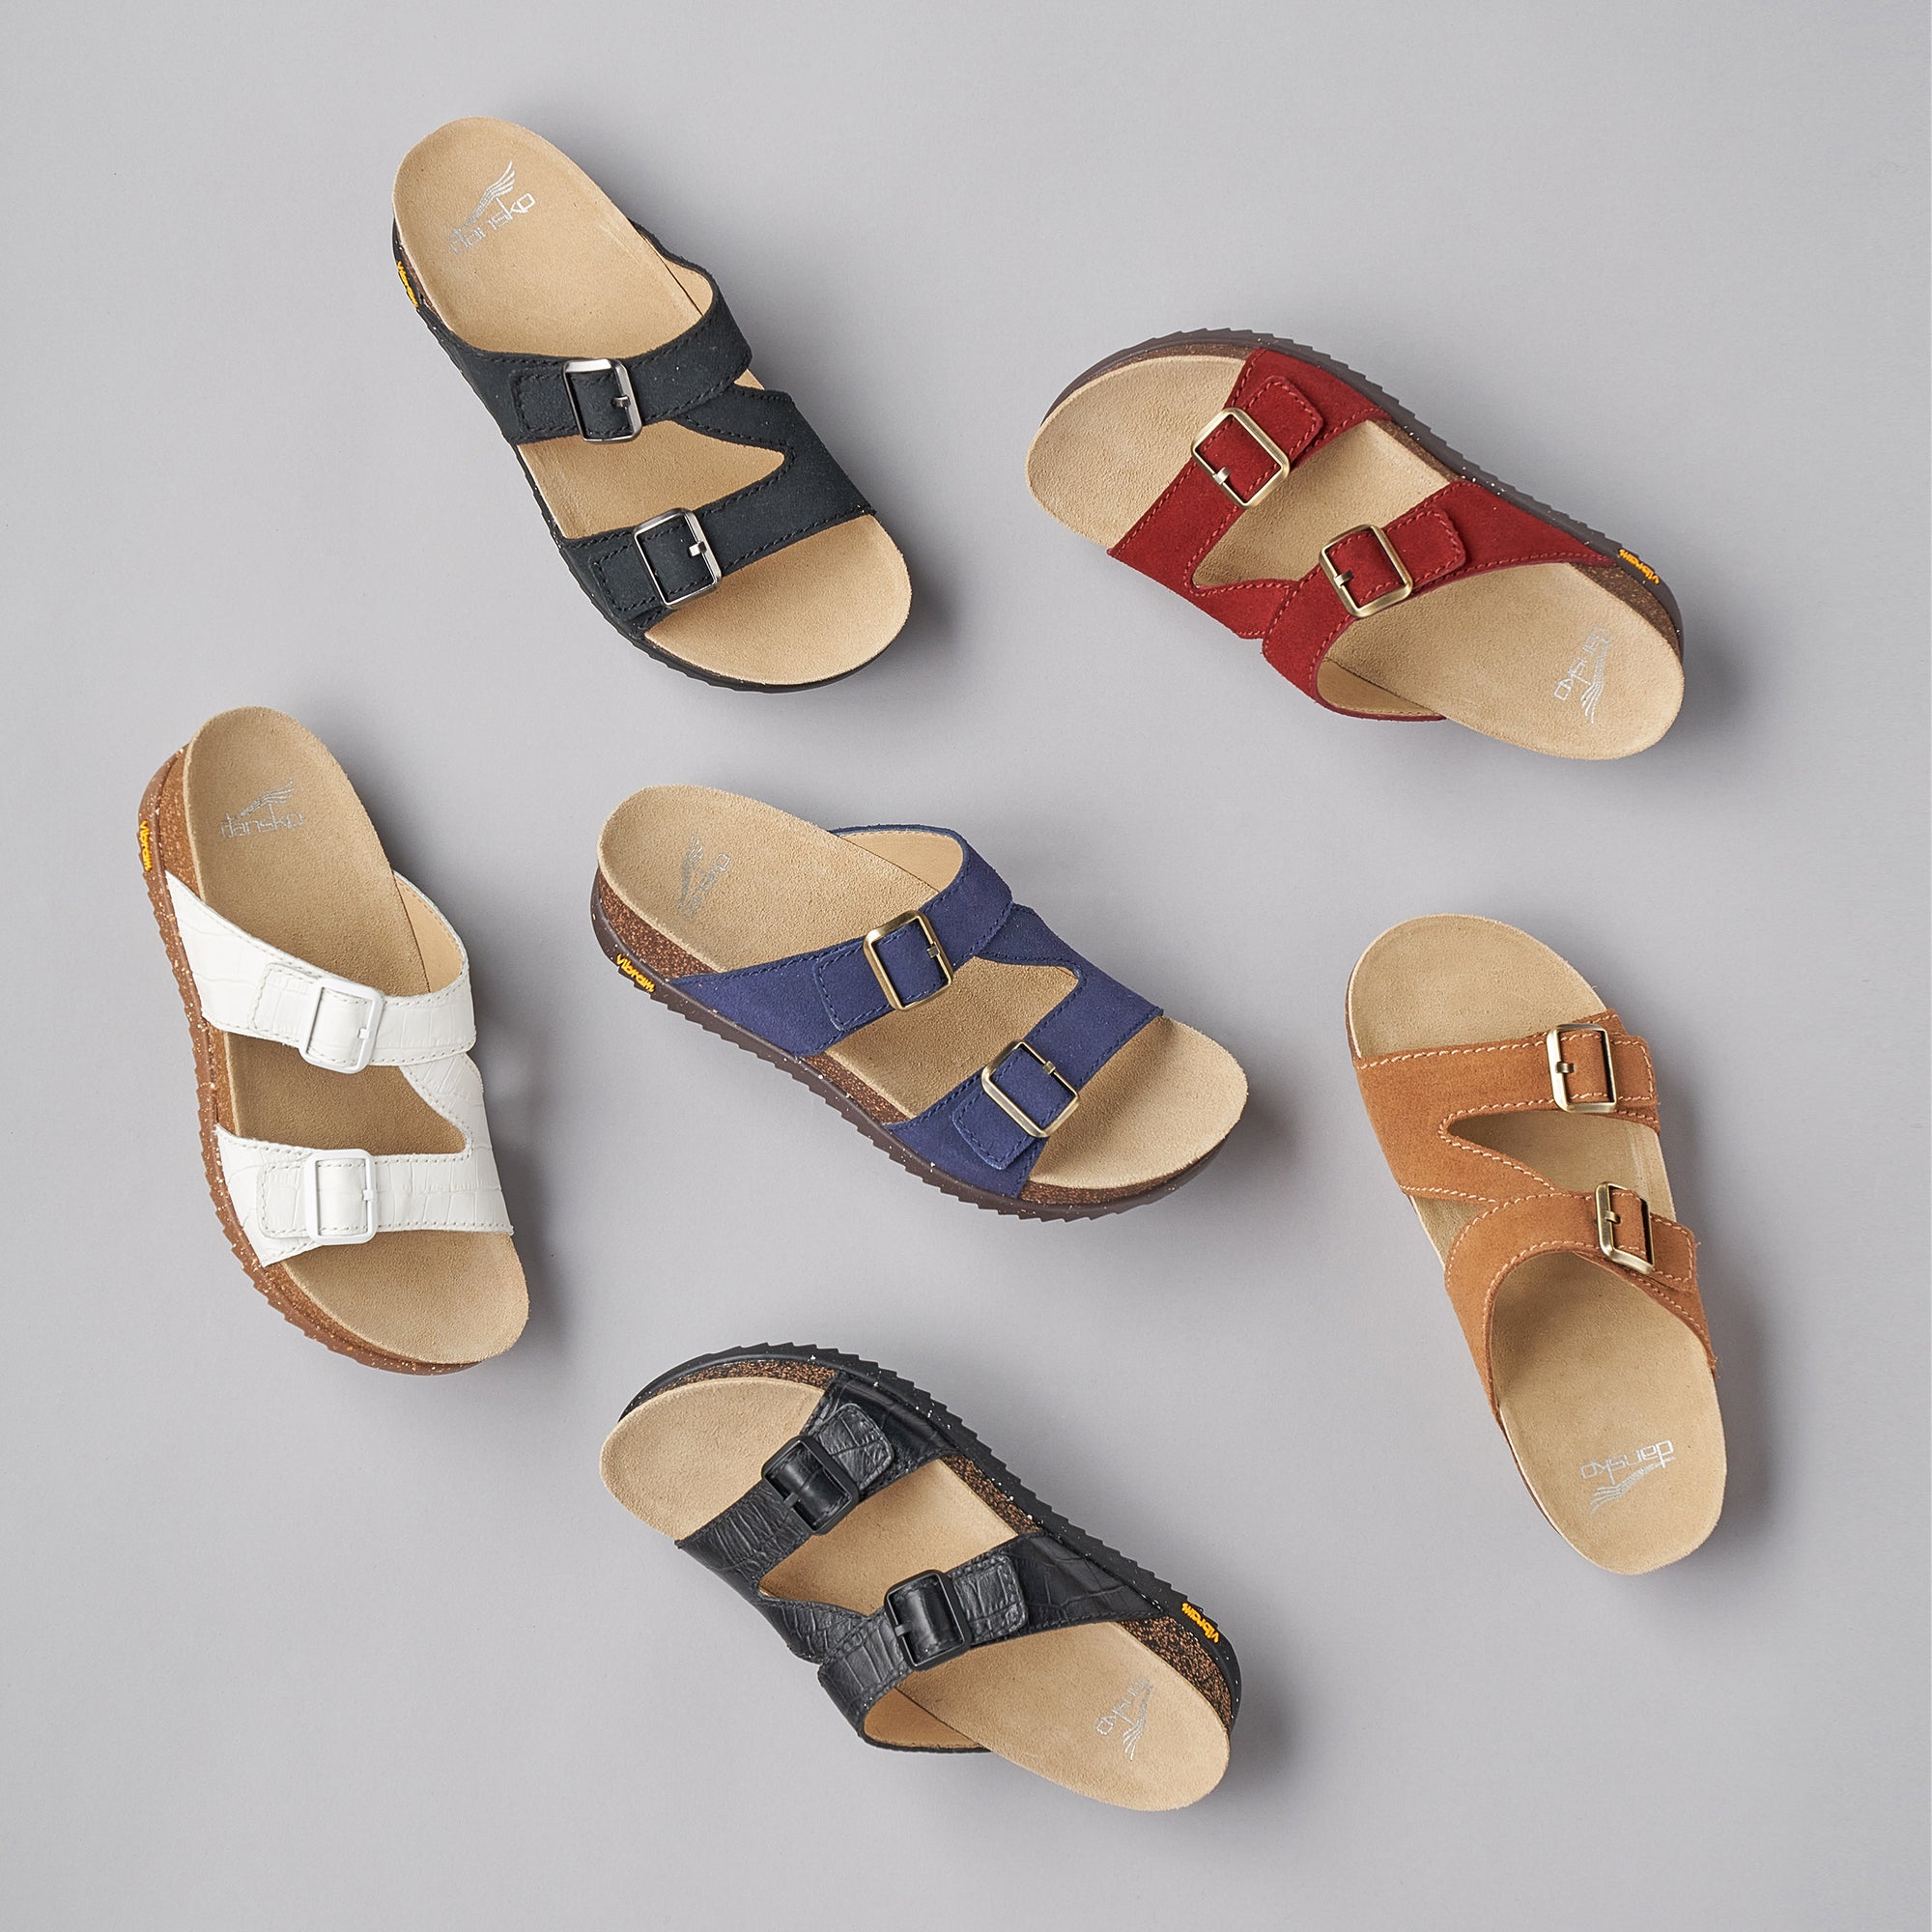 A cork-footbed sandal shown in six different color and leather options.